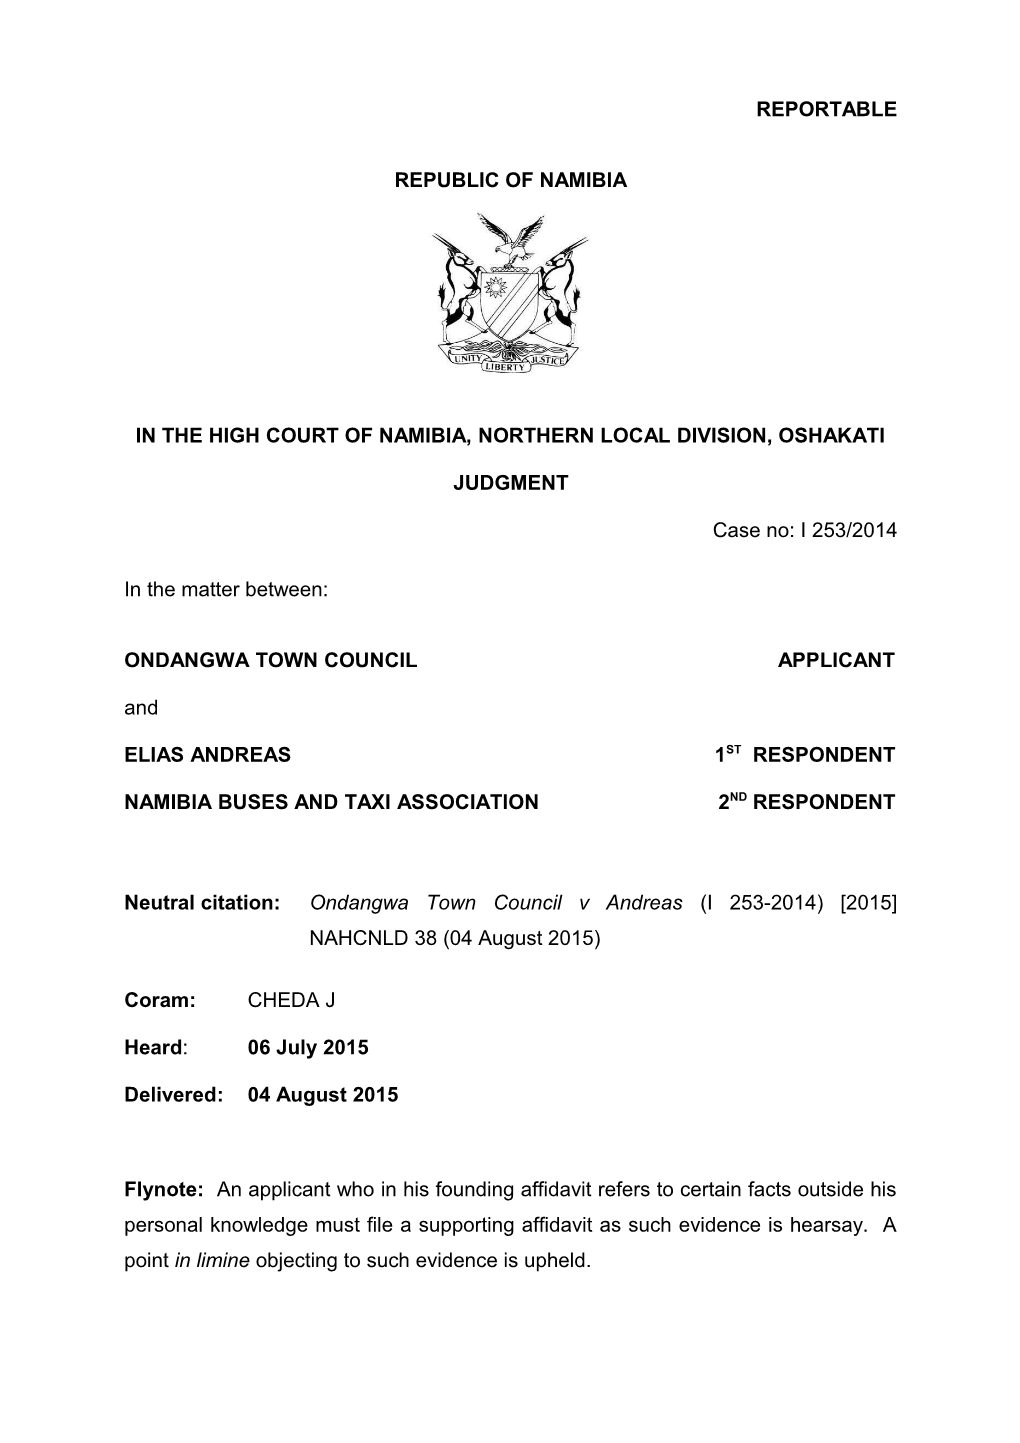 Ondangwa Town Council V Andreas (I 253-2014) 2015 NAHCNLD 38 (04 August 2015)